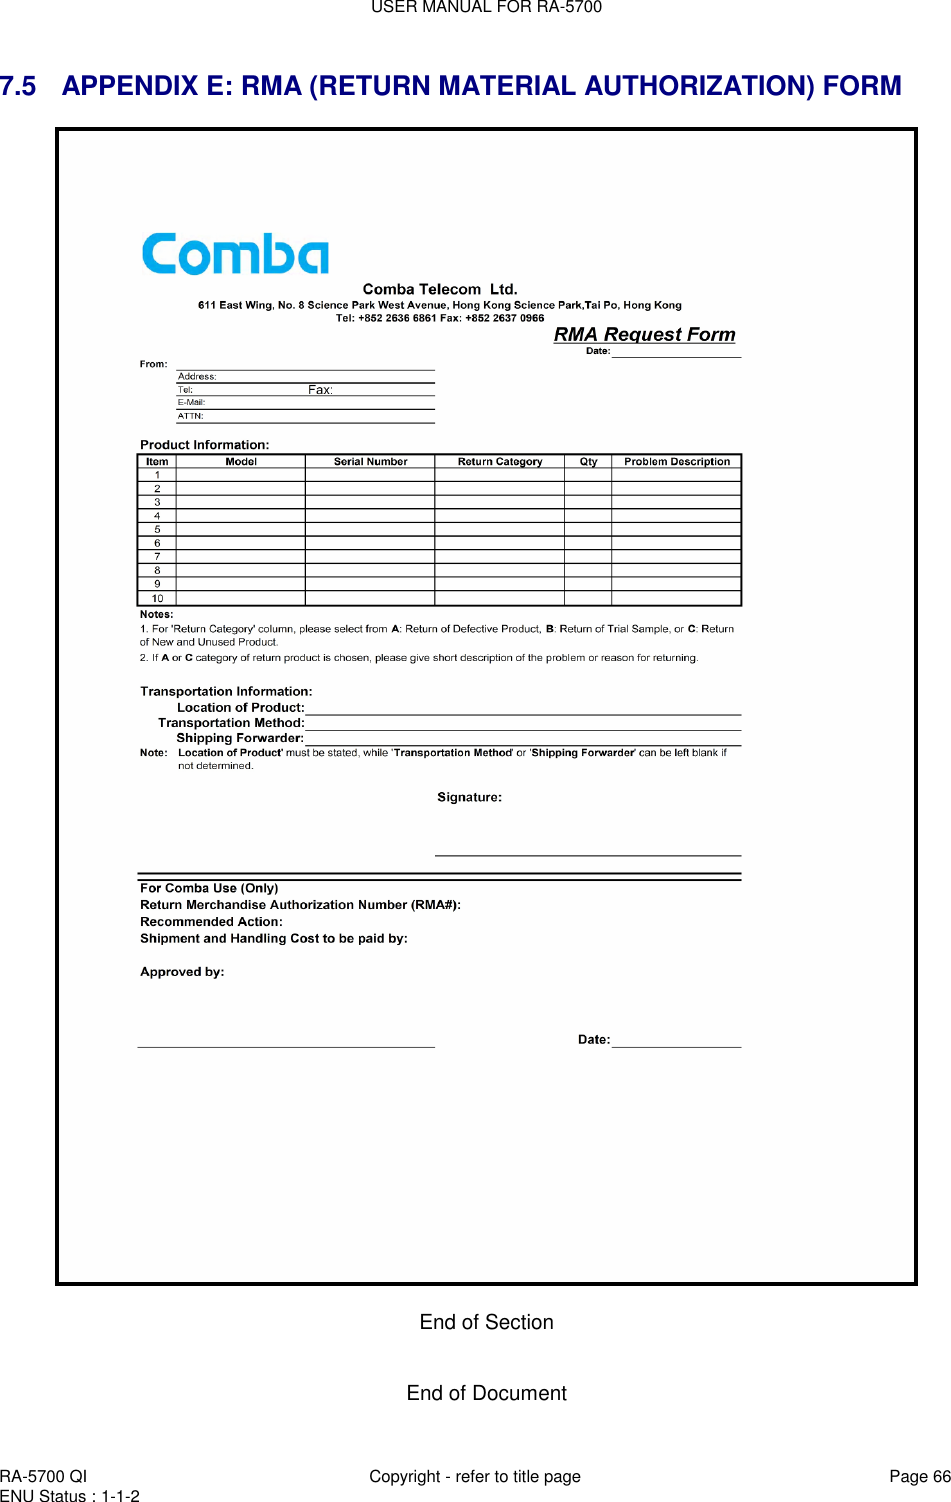 USER MANUAL FOR RA-5700  RA-5700 QI  Copyright - refer to title page Page 66 ENU Status : 1-1-2    7.5   APPENDIX E: RMA (RETURN MATERIAL AUTHORIZATION) FORM   End of Section   End of Document 